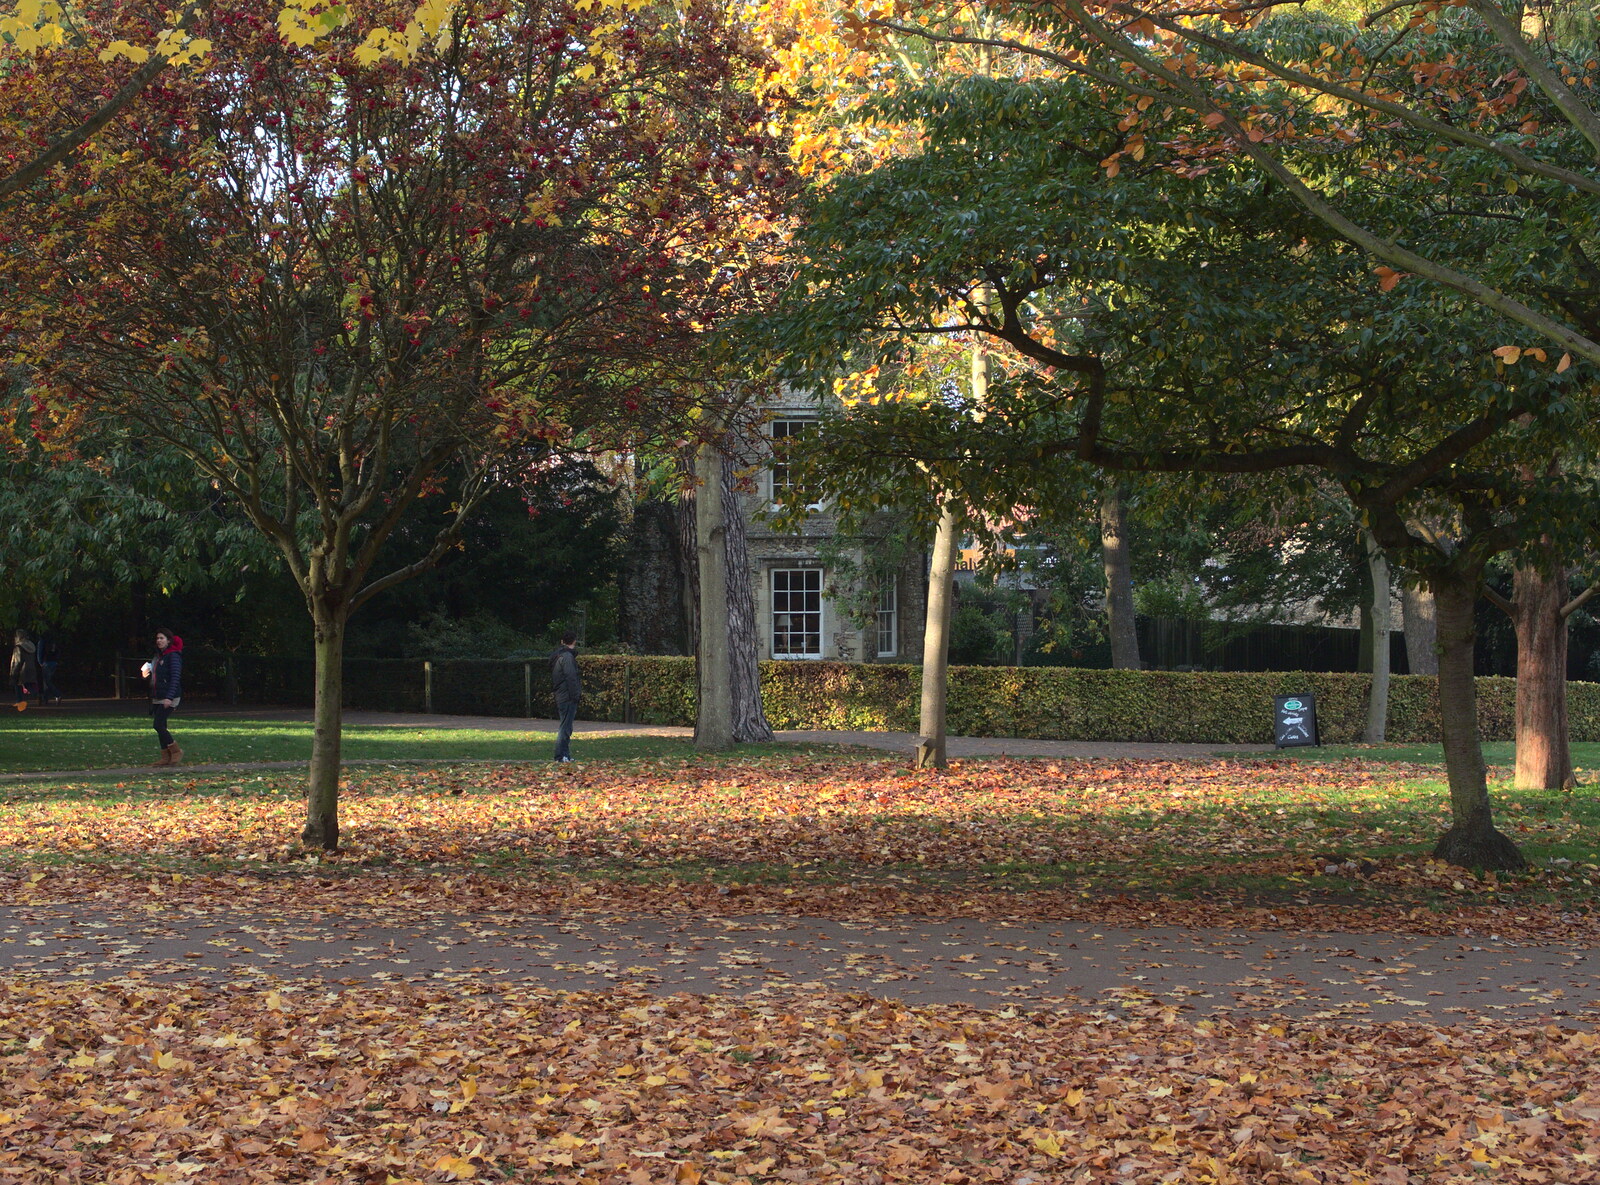 More autumn leaves from Abbey Gardens in Autumn, Bury St. Edmunds, Suffolk - 27th October 2015